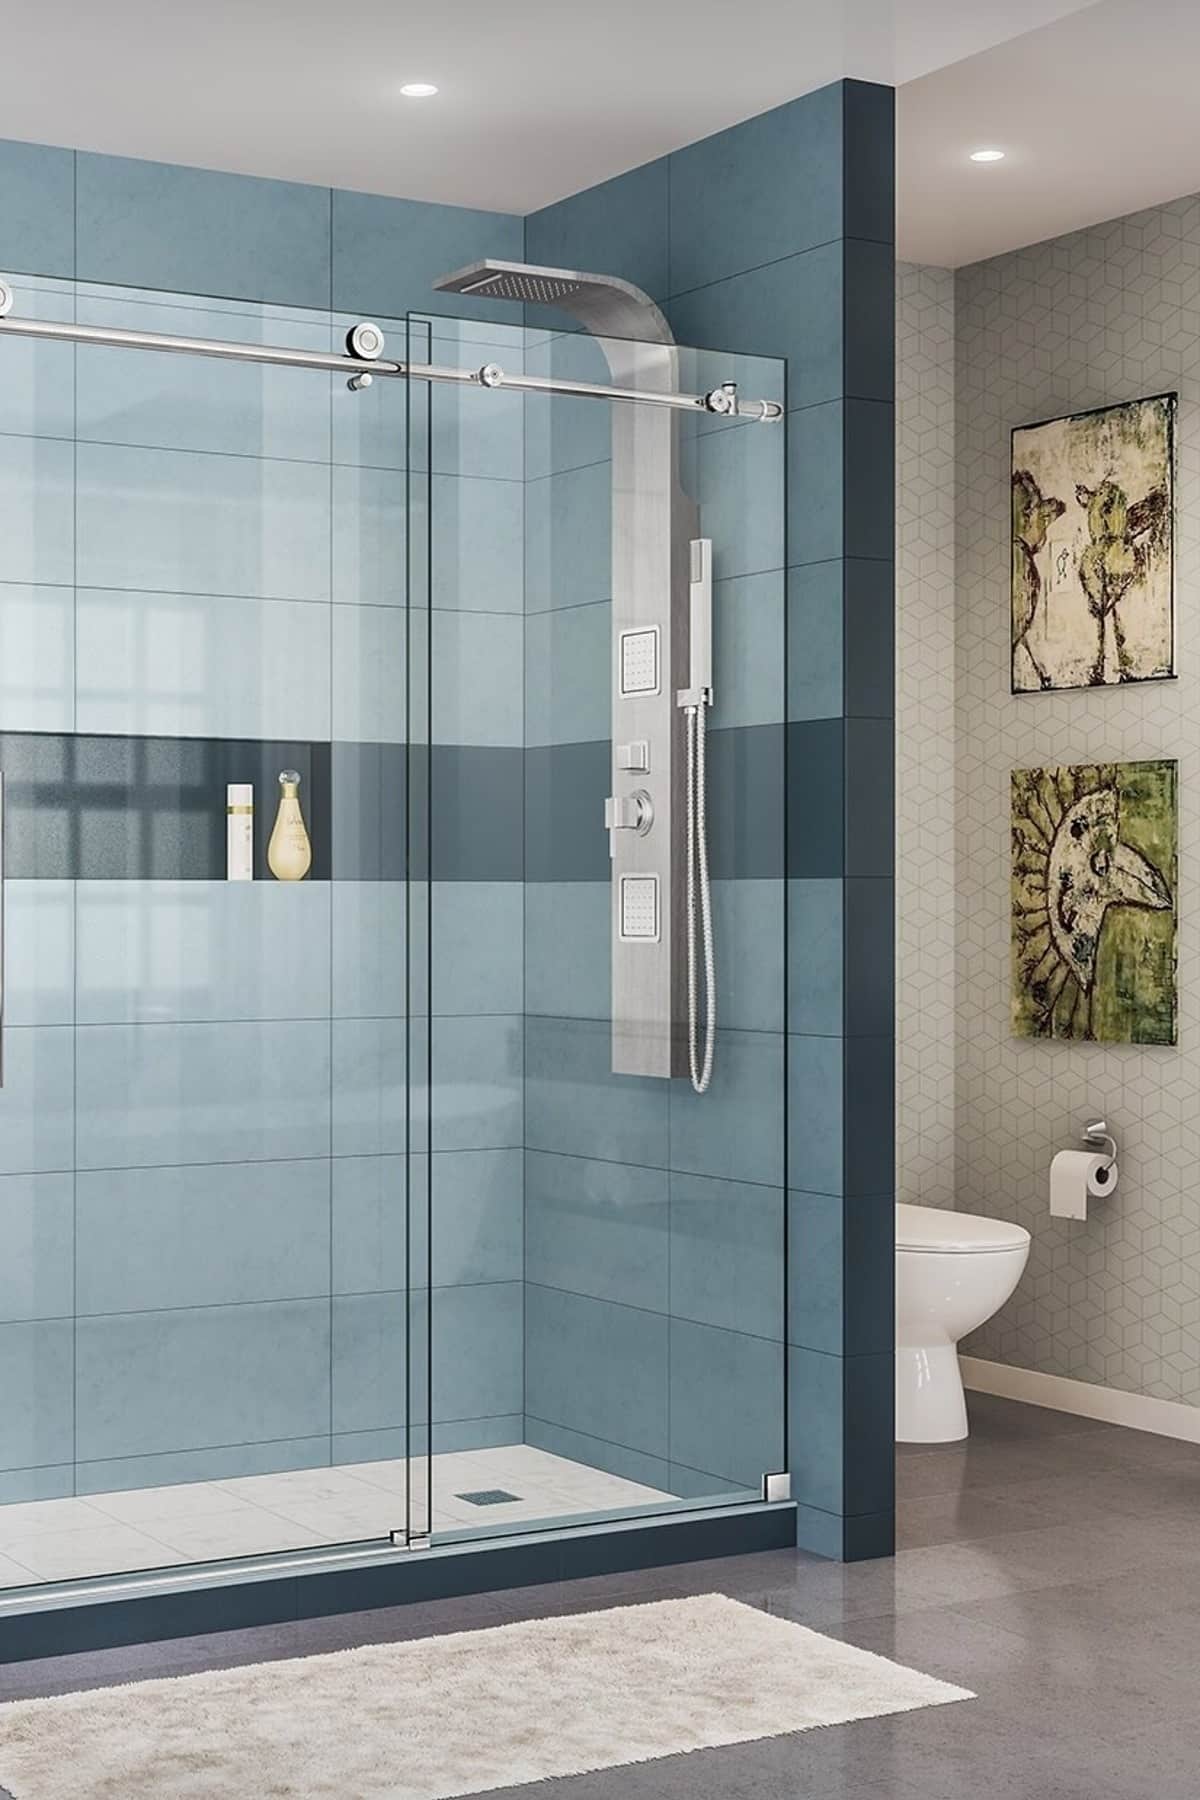 Glass walled shower area with blue walls